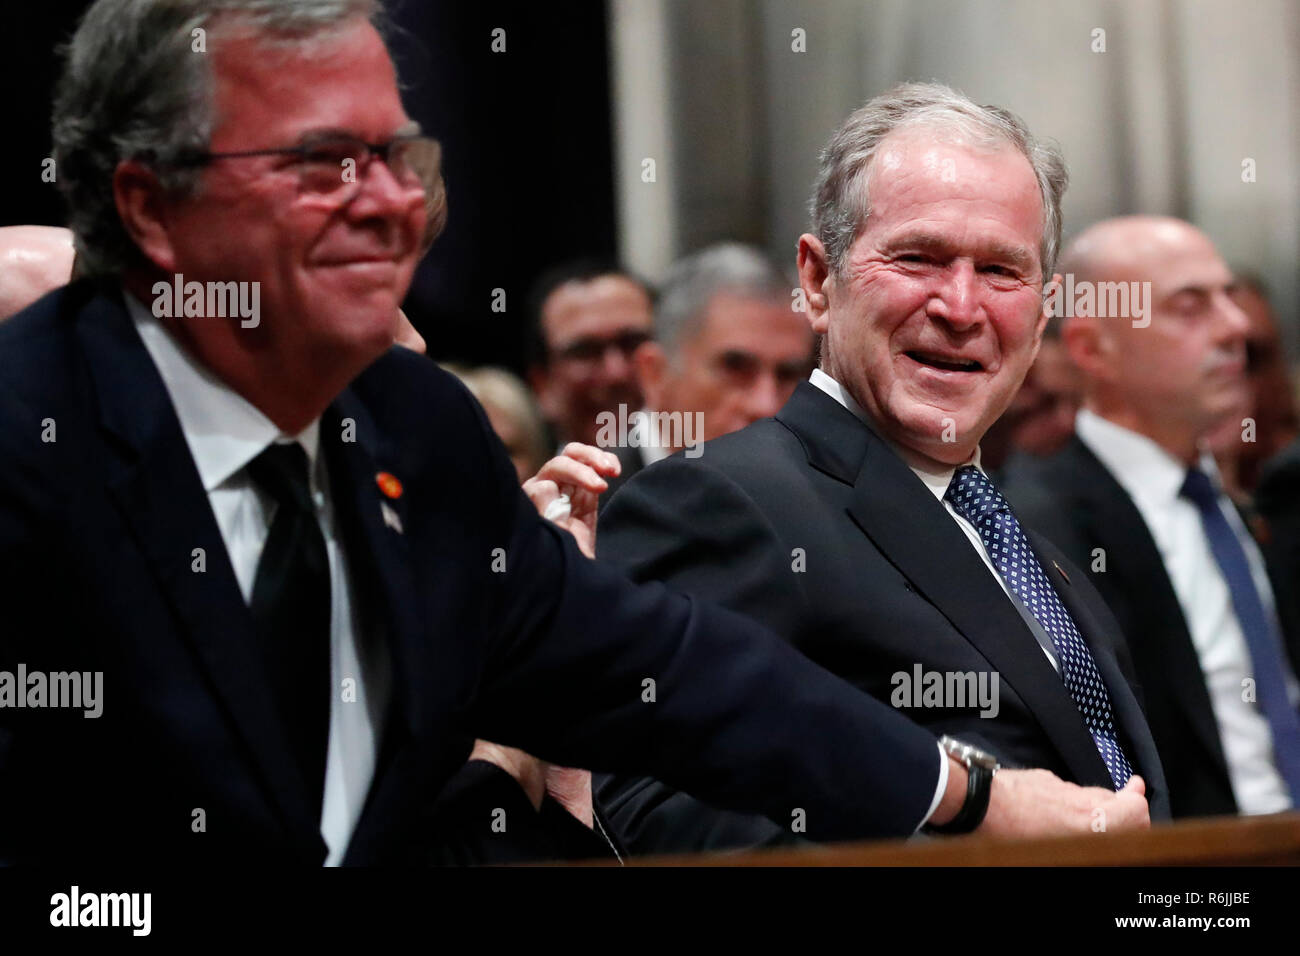 Former President George W. Bush smiles with his brother Jeb Bush at the State Funeral for their father, former President George H.W. Bush, at the National Cathedral, Wednesday, Dec. 5, 2018, in Washington.  Credit: Alex Brandon / Pool via CNP | usage worldwide Stock Photo